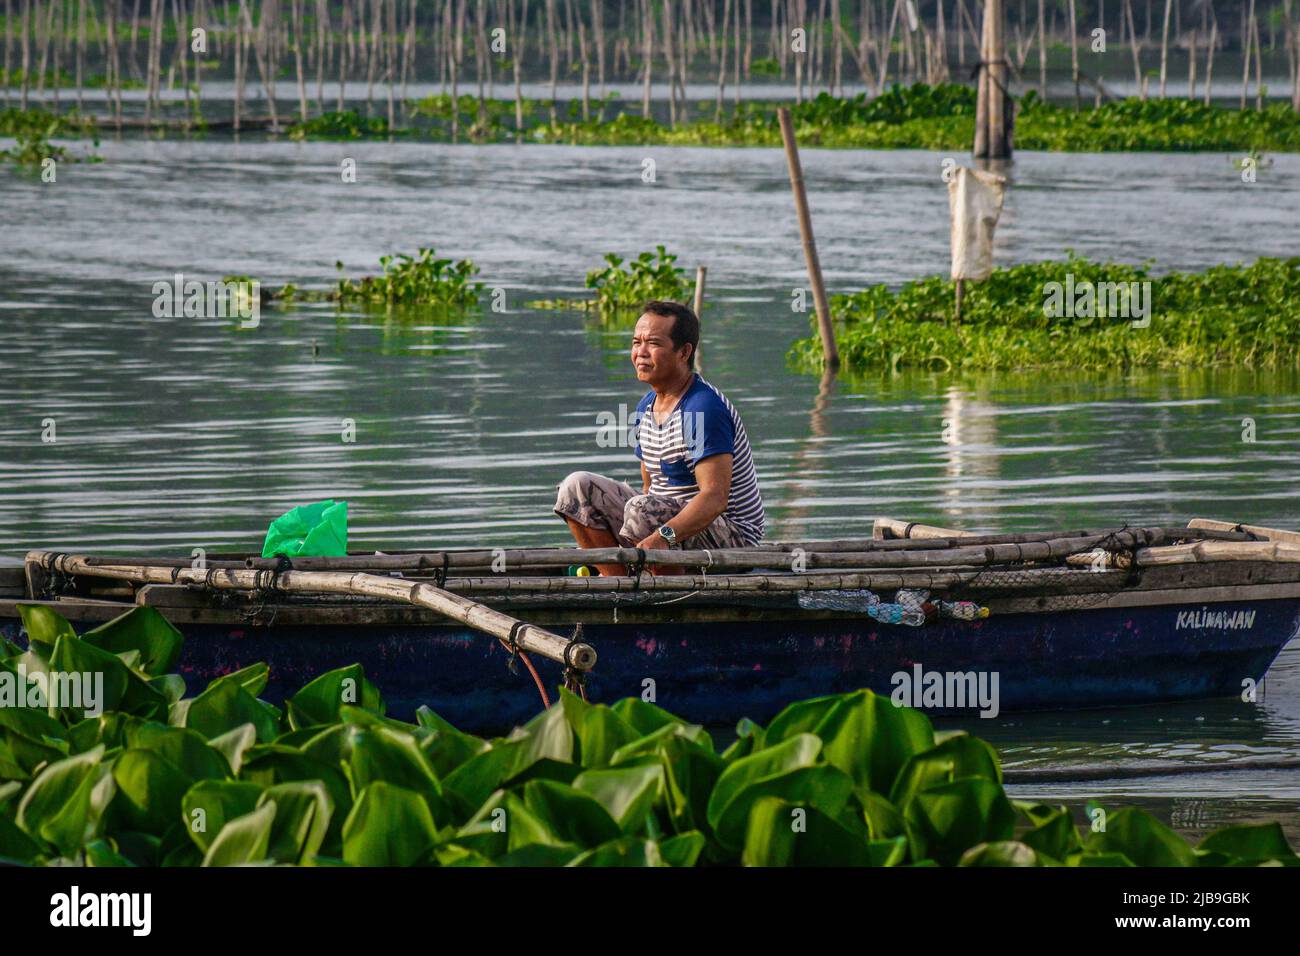 A fisherman rows his small boat between floating water hyacinths. Laguna Lake is the largest lake in the Philippines, covering a surface of 900 square kilometers or equivalent to 90,000 hectares. Its water runs from Laguna Province all the way to the Province of Rizal, the southern part of Luzon. The lake provides resources like transportation, recreation, livelihood, and most importantly food for the surrounding communities. Laguna Lake is classified as Class C freshwater which has the capability to grow fish and other aquatic resources. Some watershed near Metro Manila classified as Class D Stock Photo